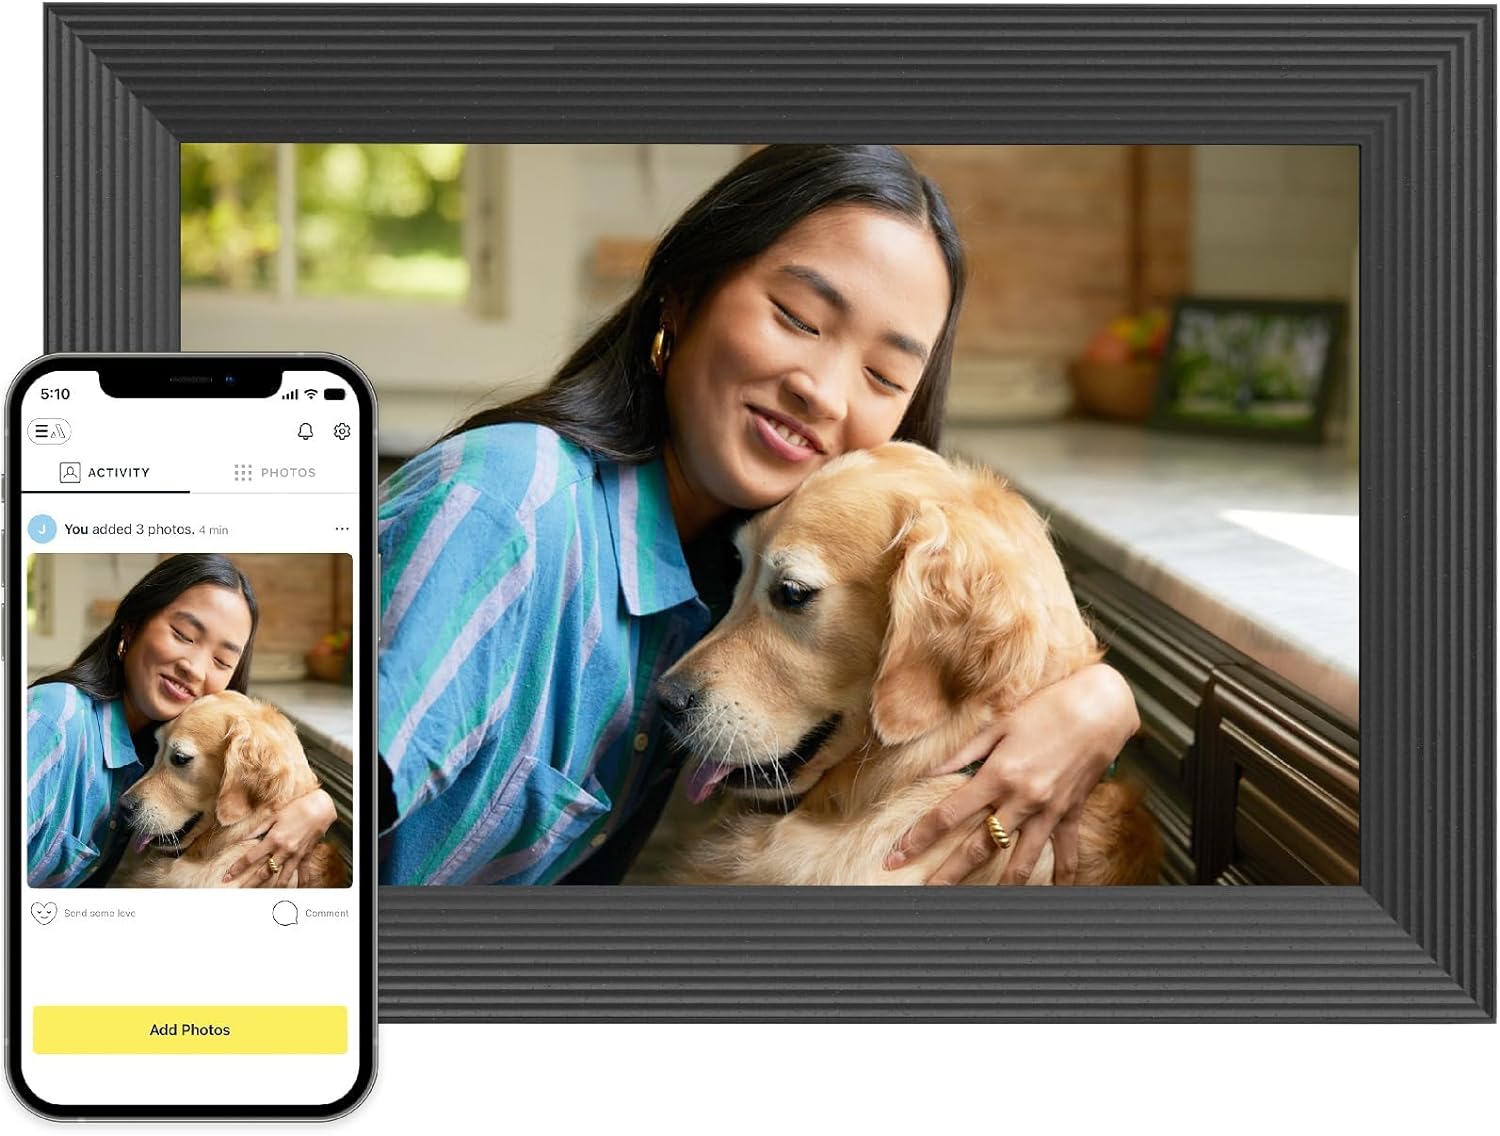 Black frame with a girl and her dog with the same image on a smartphone adjacent 